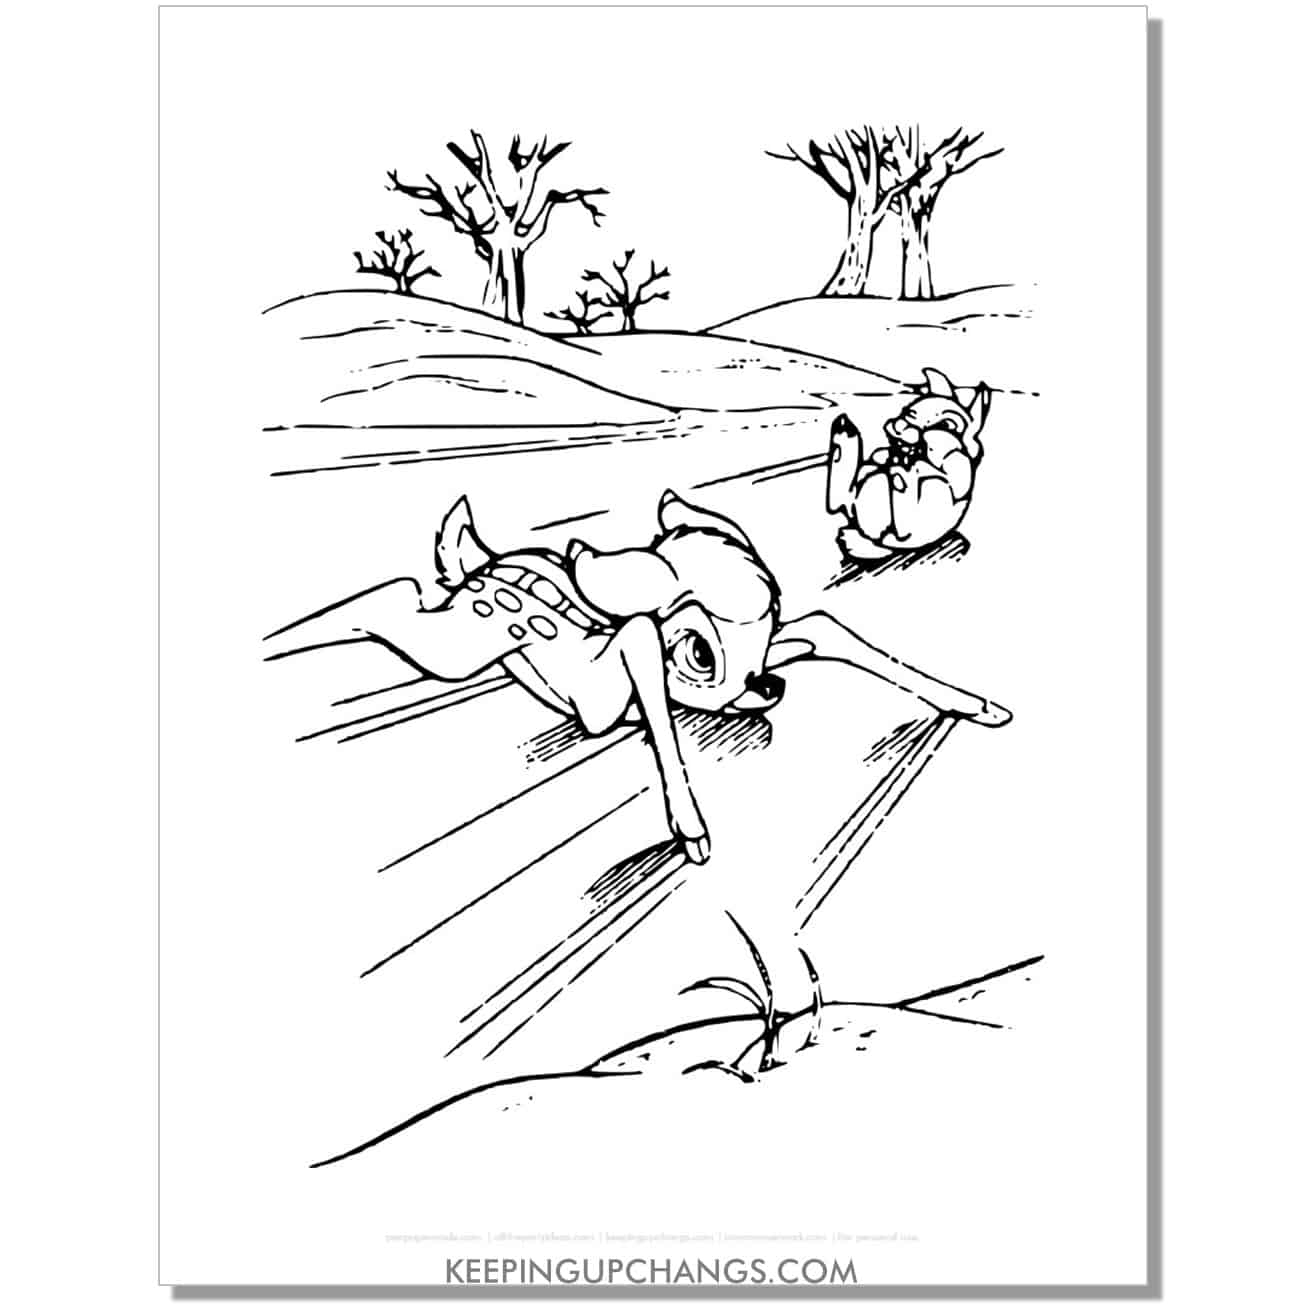 free thumper laughing at bambi on ice coloring page, sheet.